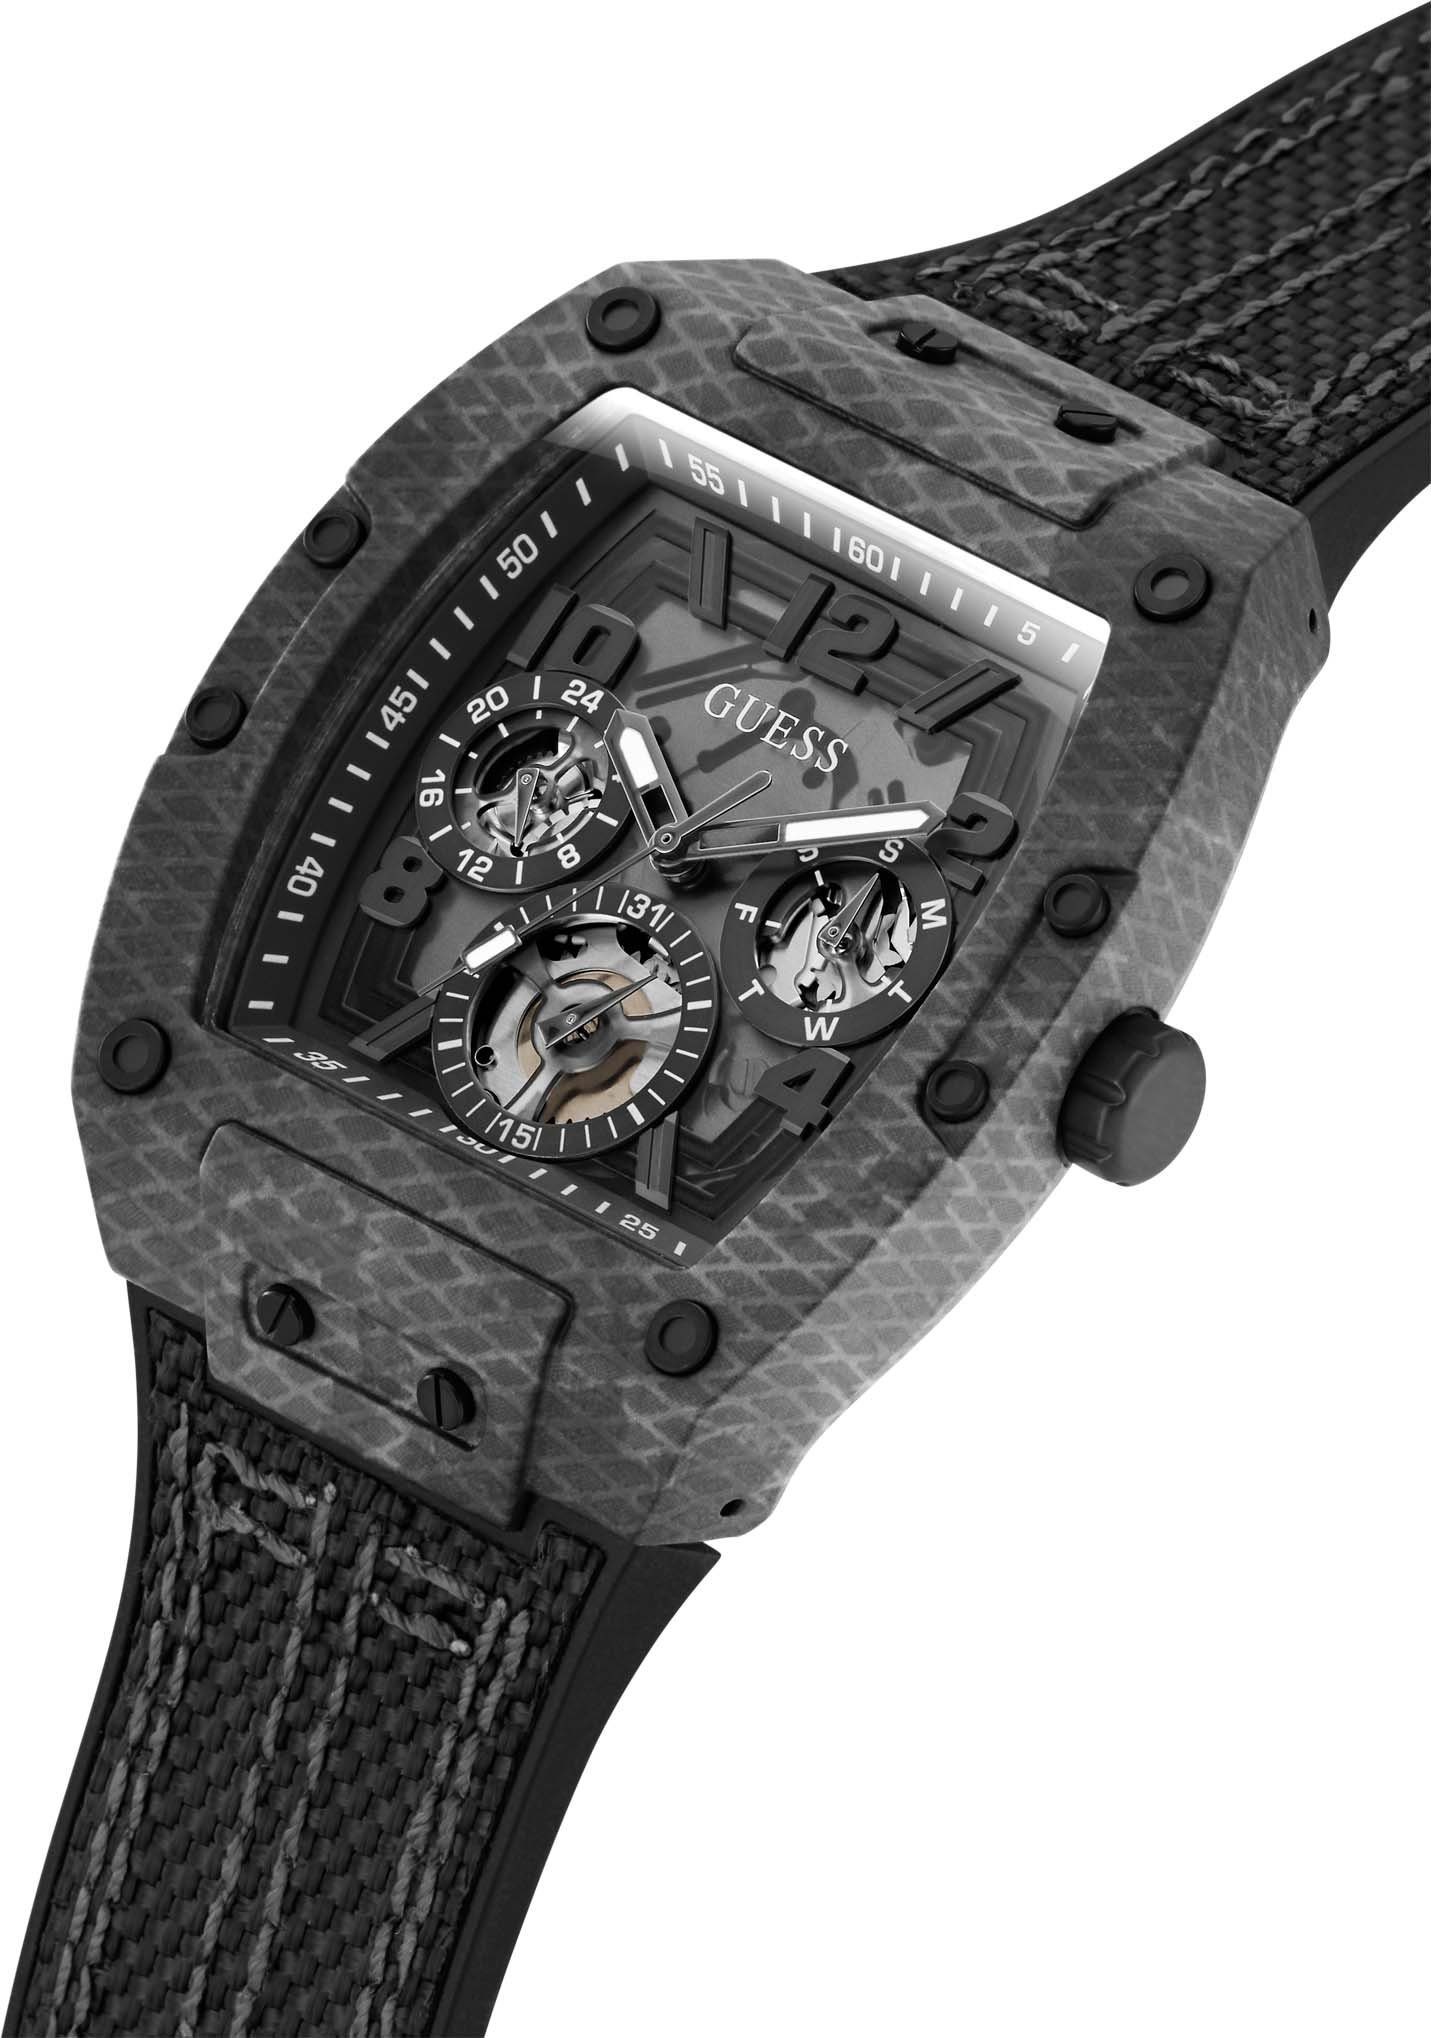 Multifunktionsuhr GW0422G2 Guess